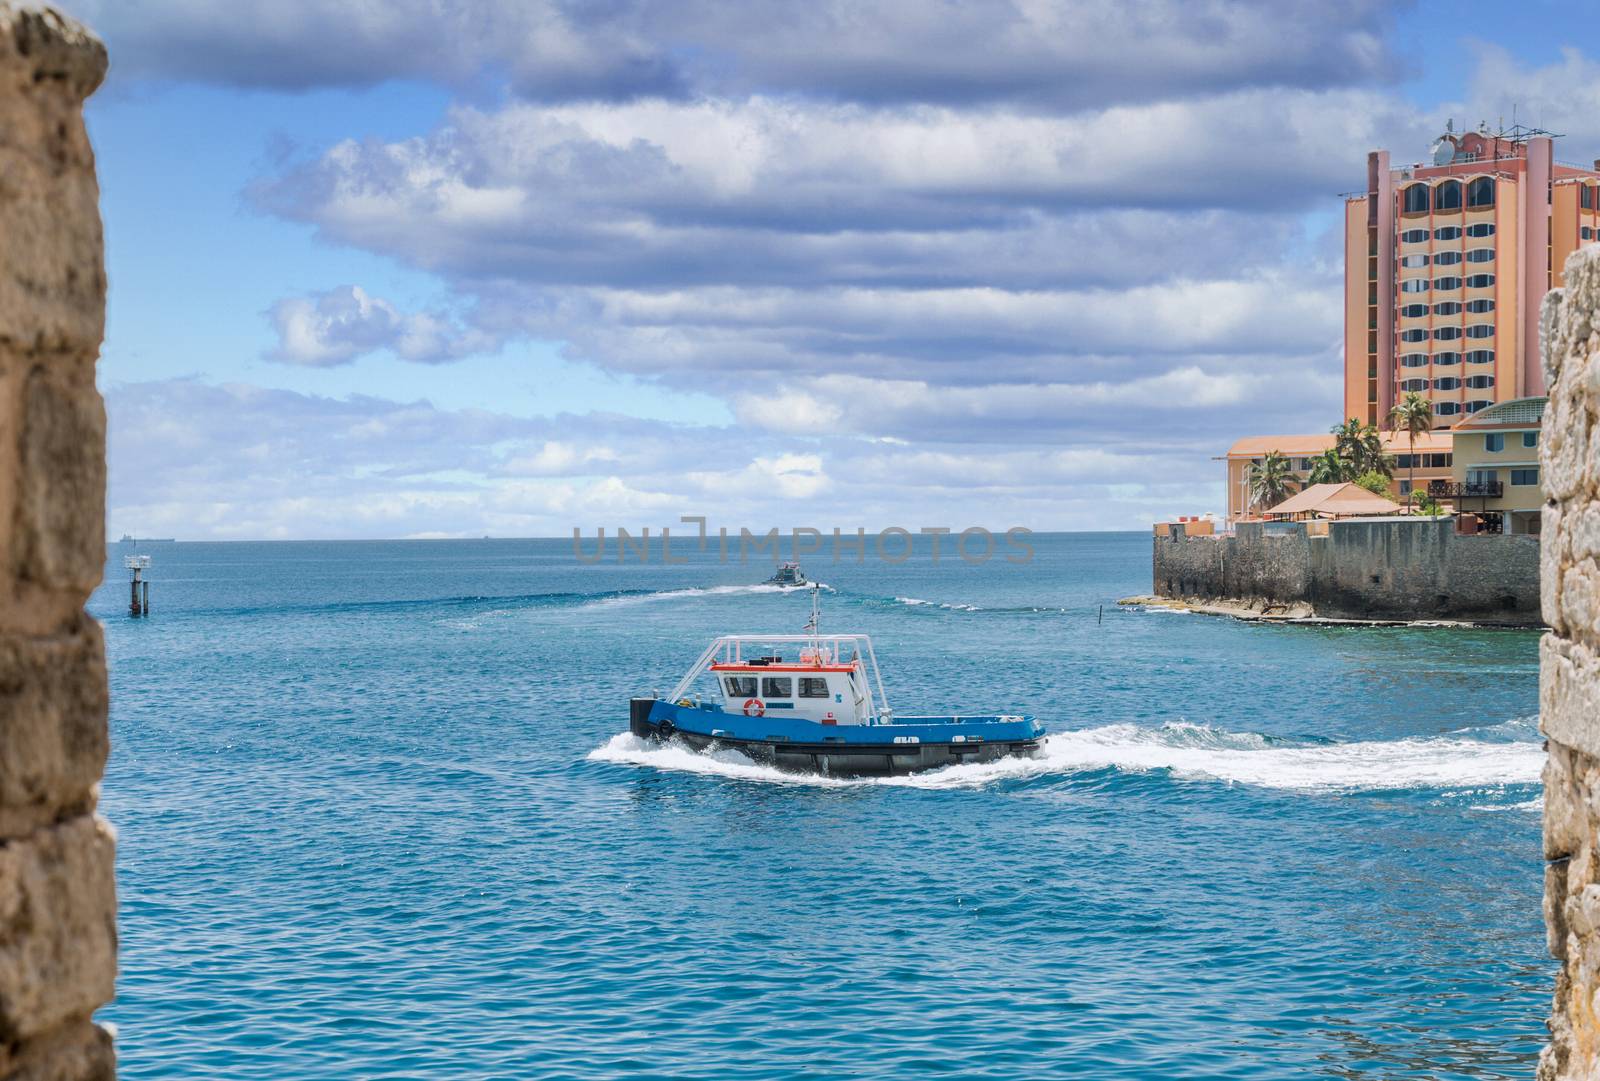 Pilot Boat Through Stone Wall in Curacao by dbvirago